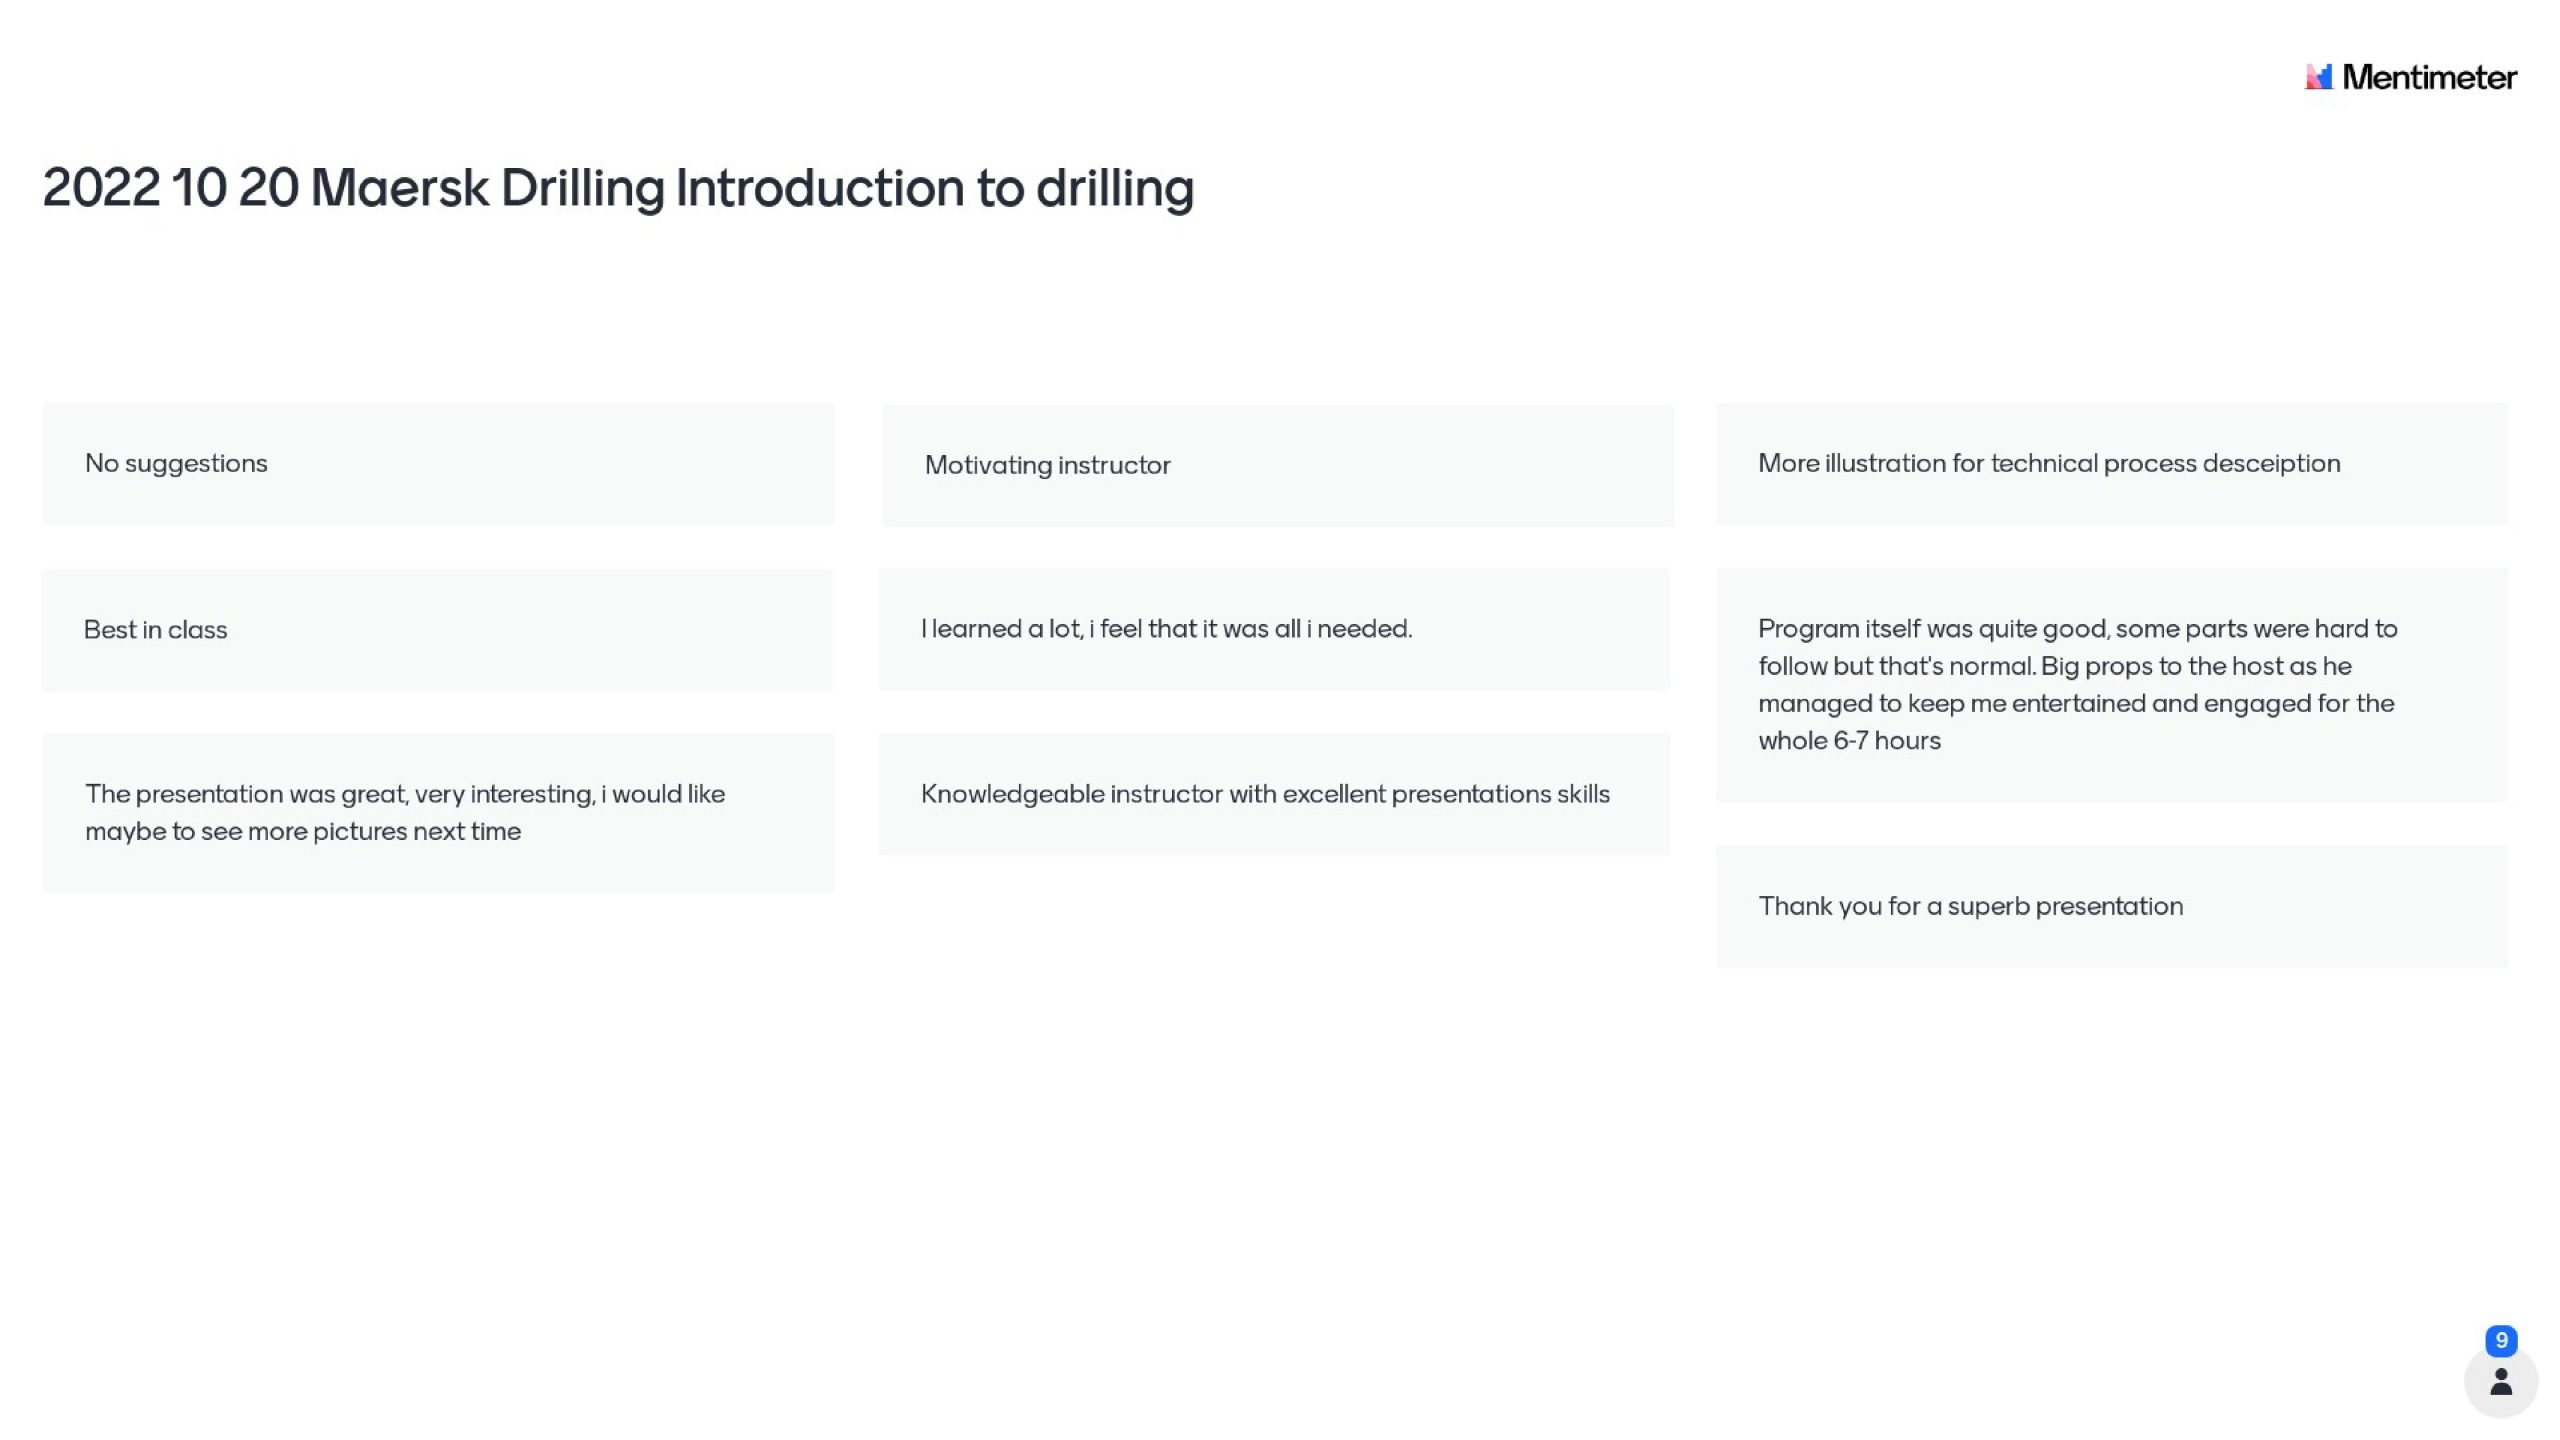 2022 10 20 Maersk Drilling Introduction to drilling